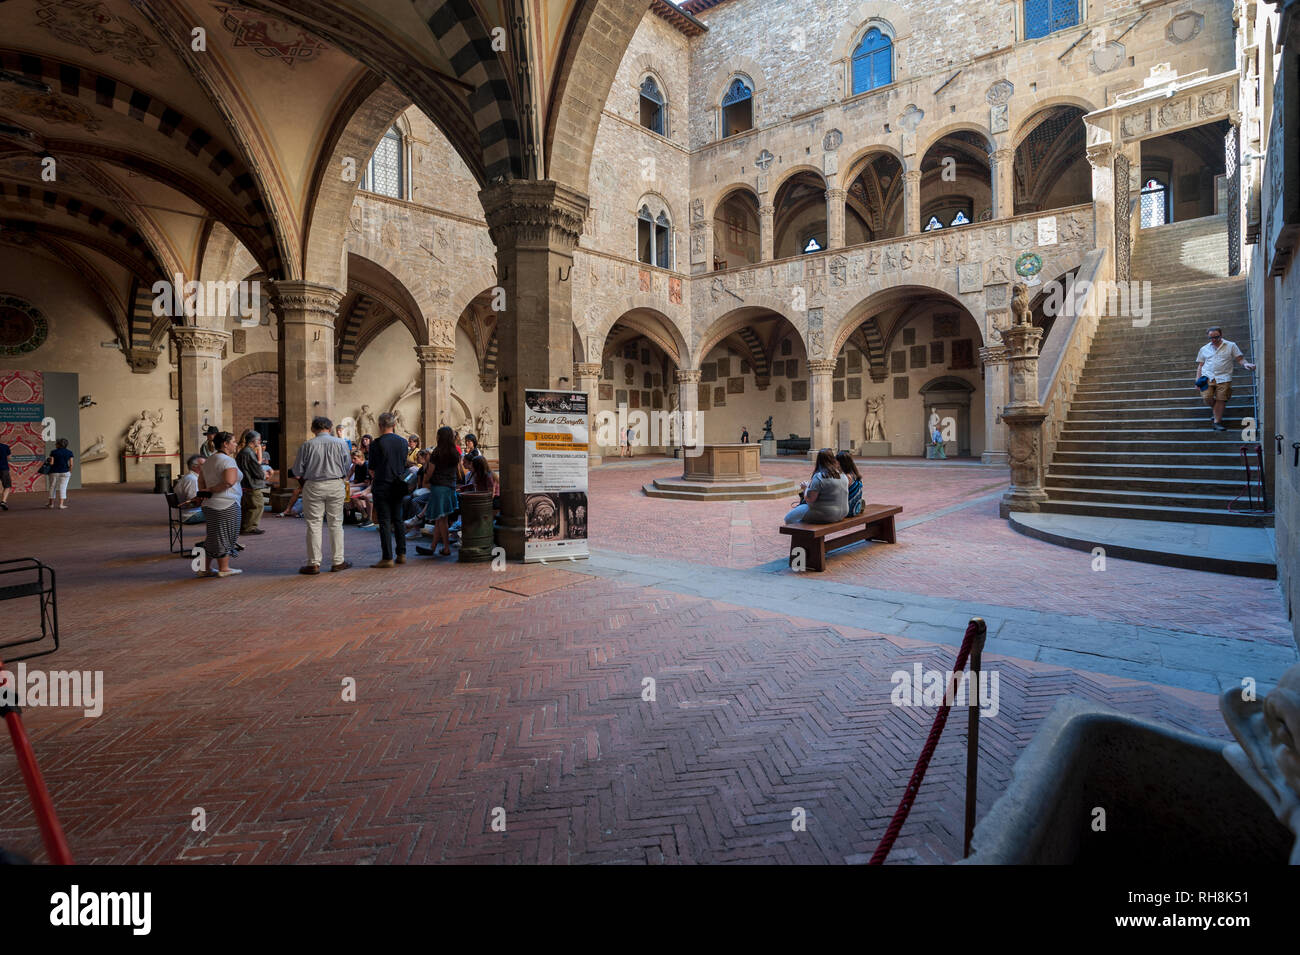 Florence, Italy - 2018, July 1: People pass through the Bargello courtyard. The National Museum has its setting in one of the oldest buildings in Flor Stock Photo